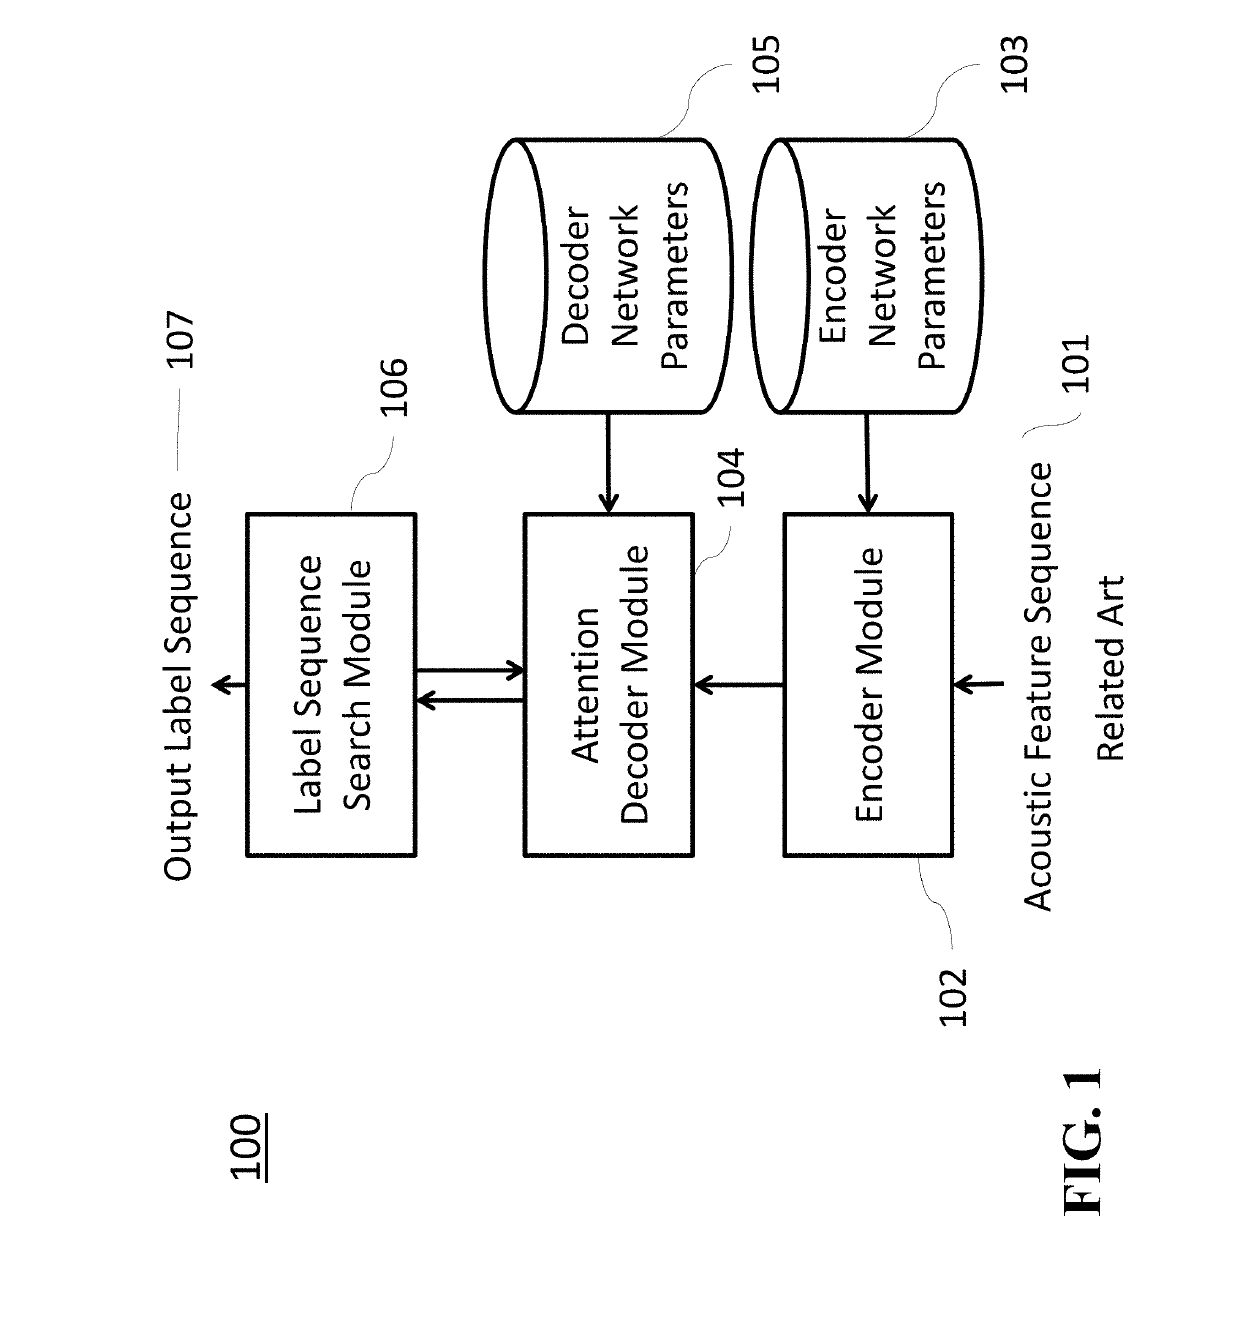 Method and Apparatus for Open-Vocabulary End-to-End Speech Recognition